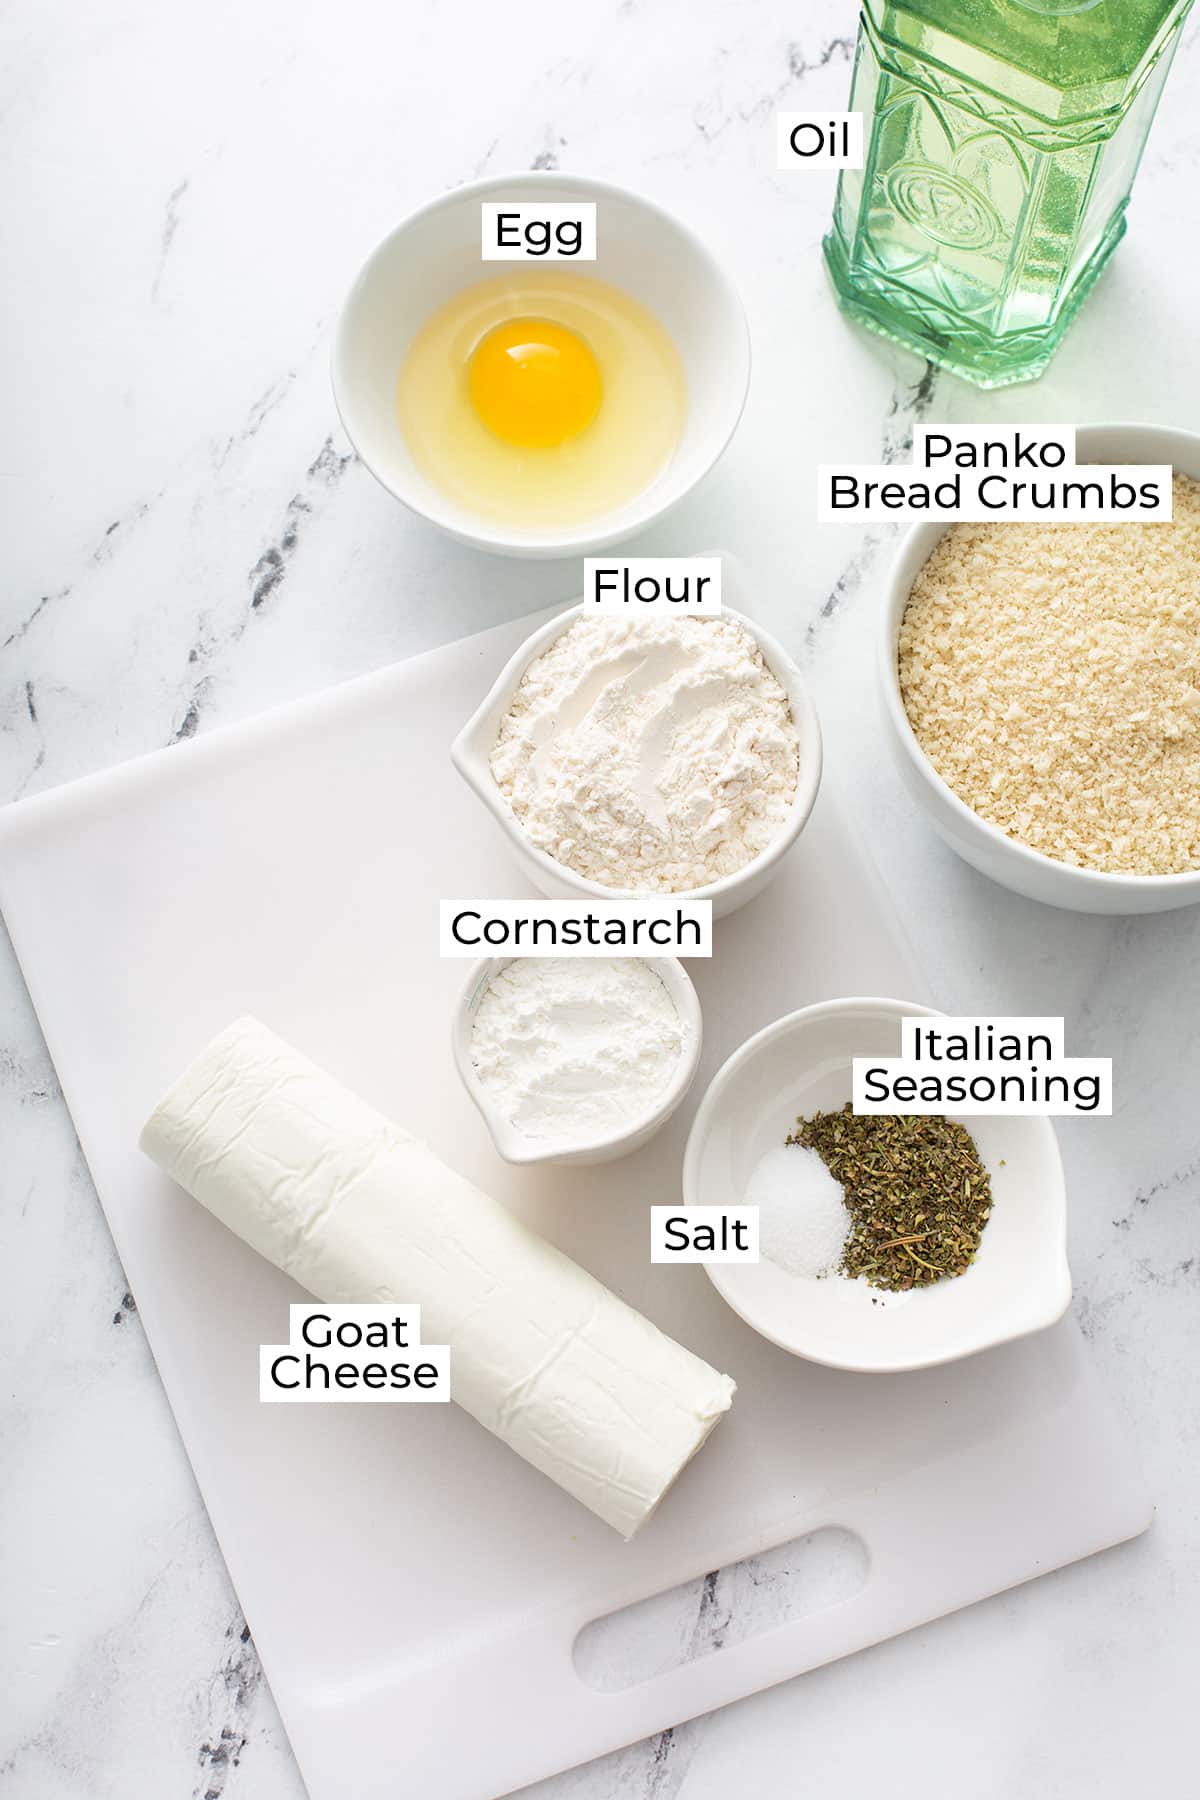 ingredients to make crispy fried goat cheese
